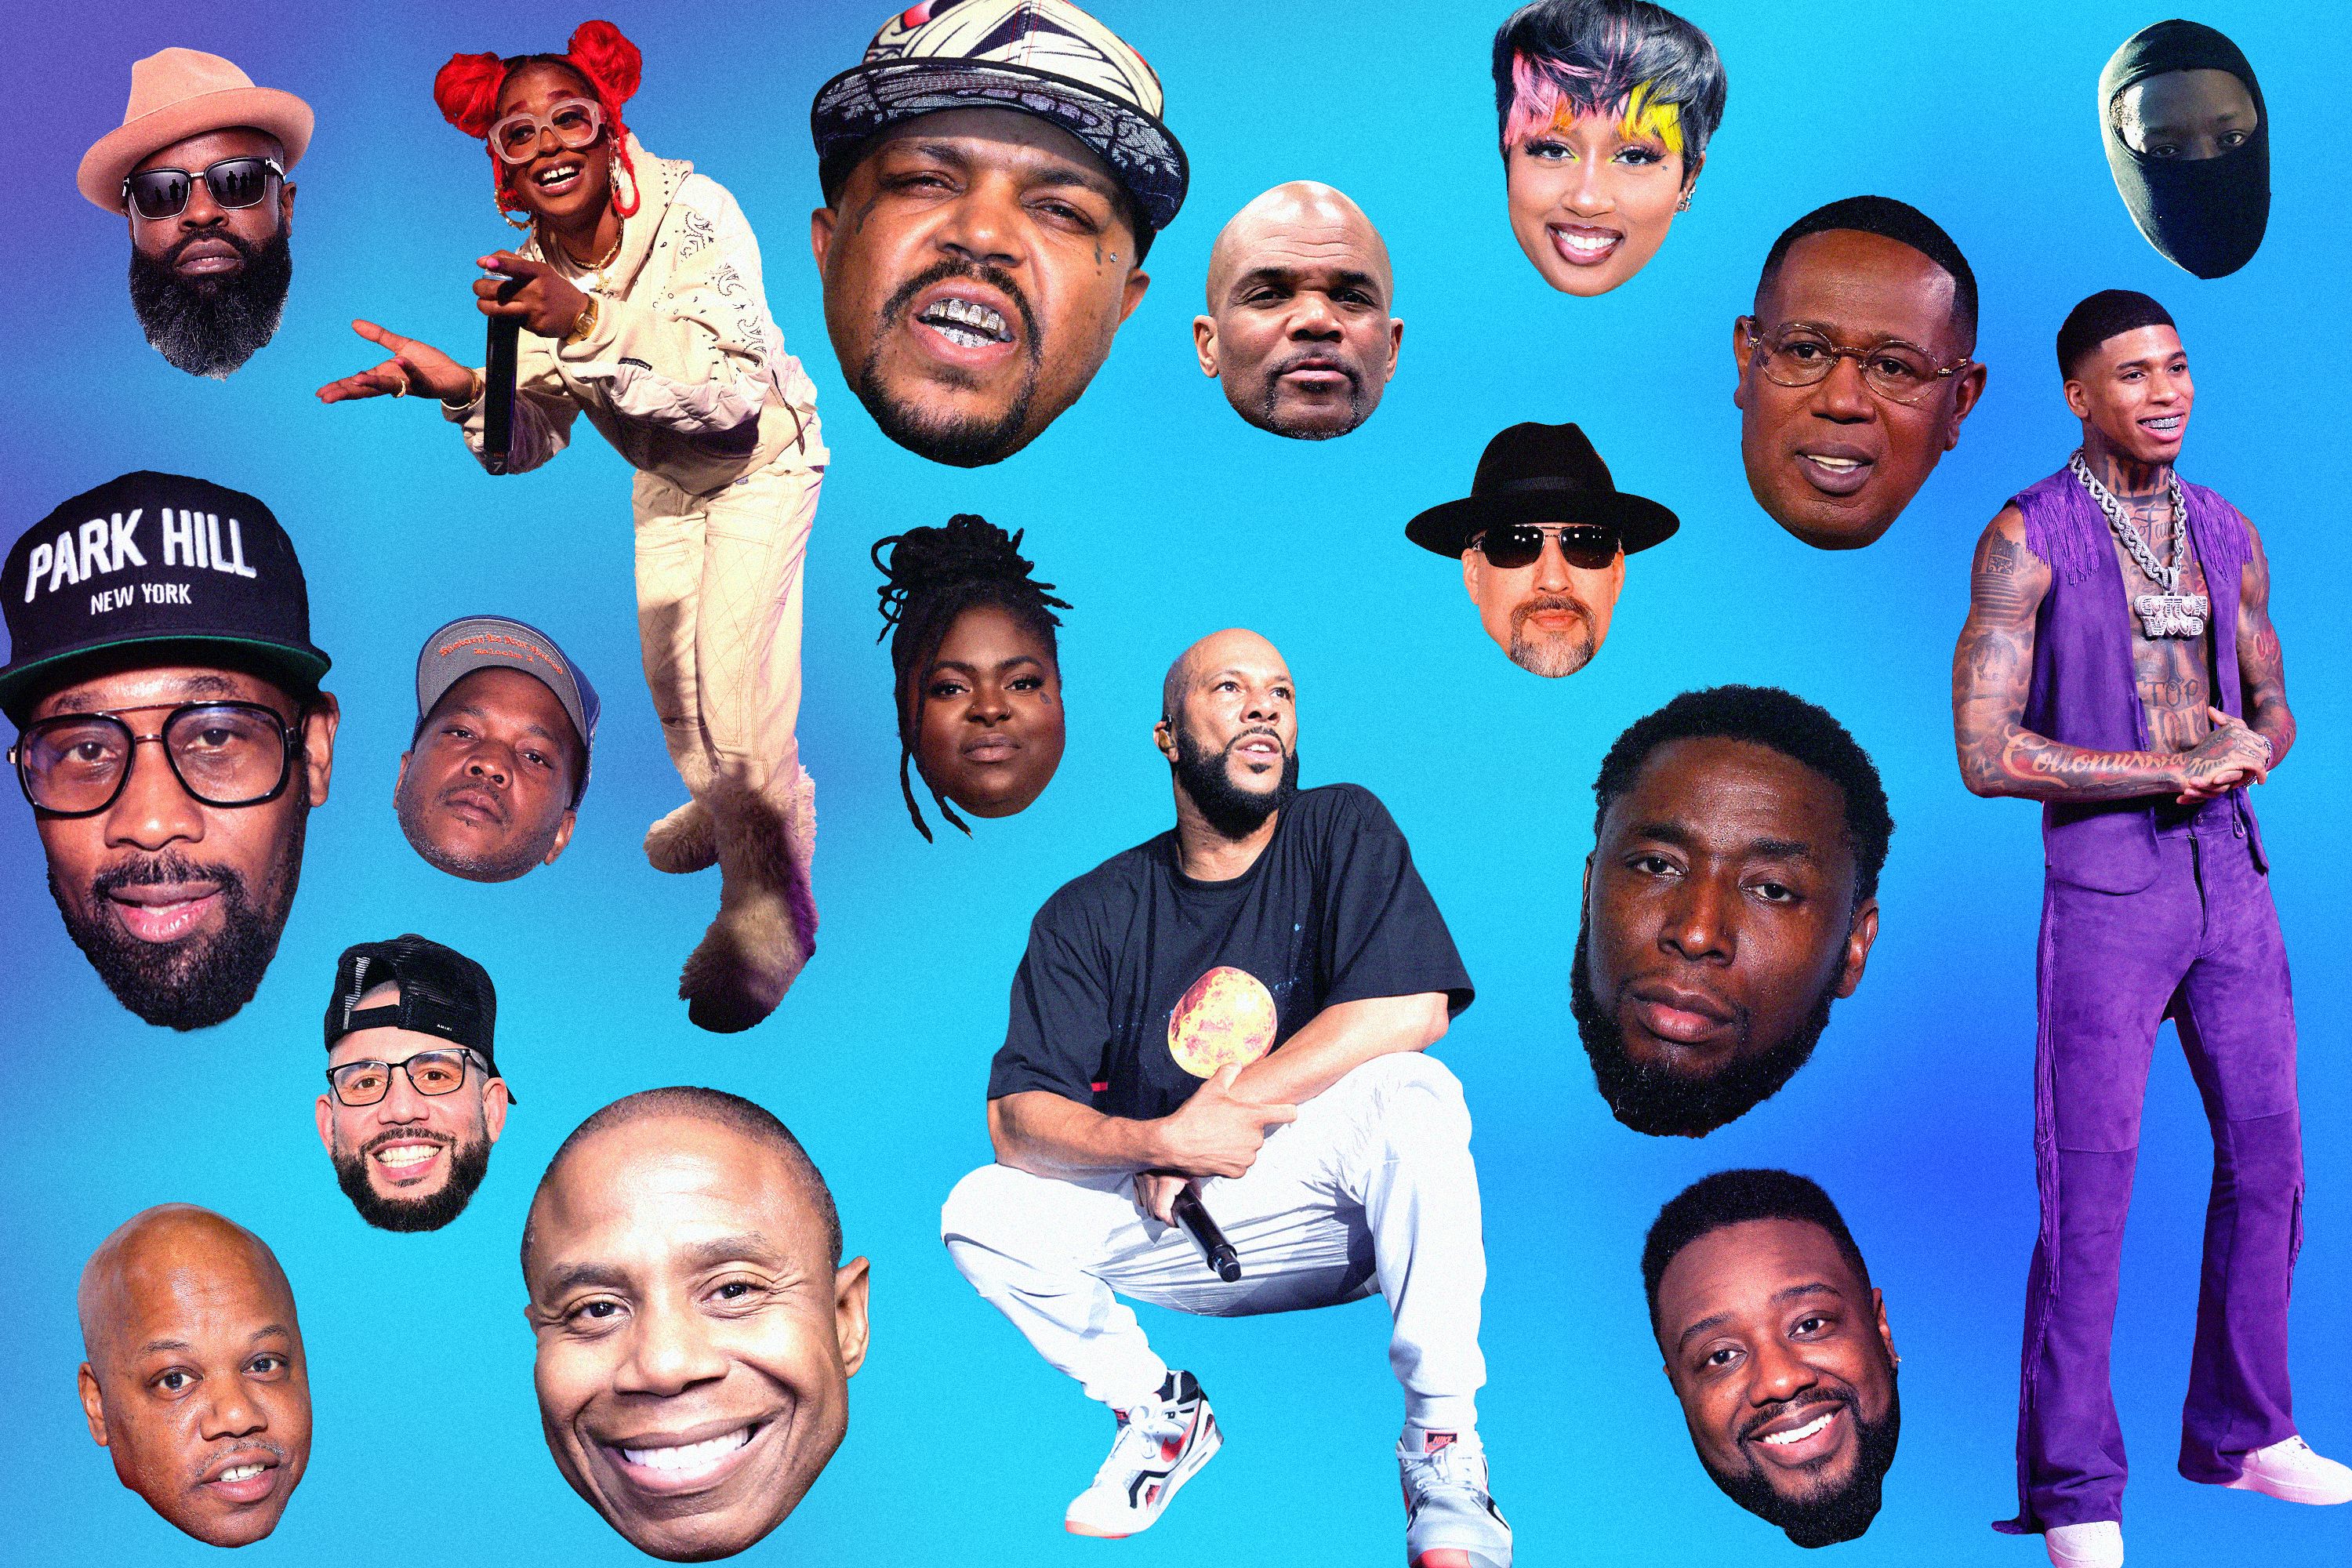 Here's all the dope on the creative artists behind 'Stranger